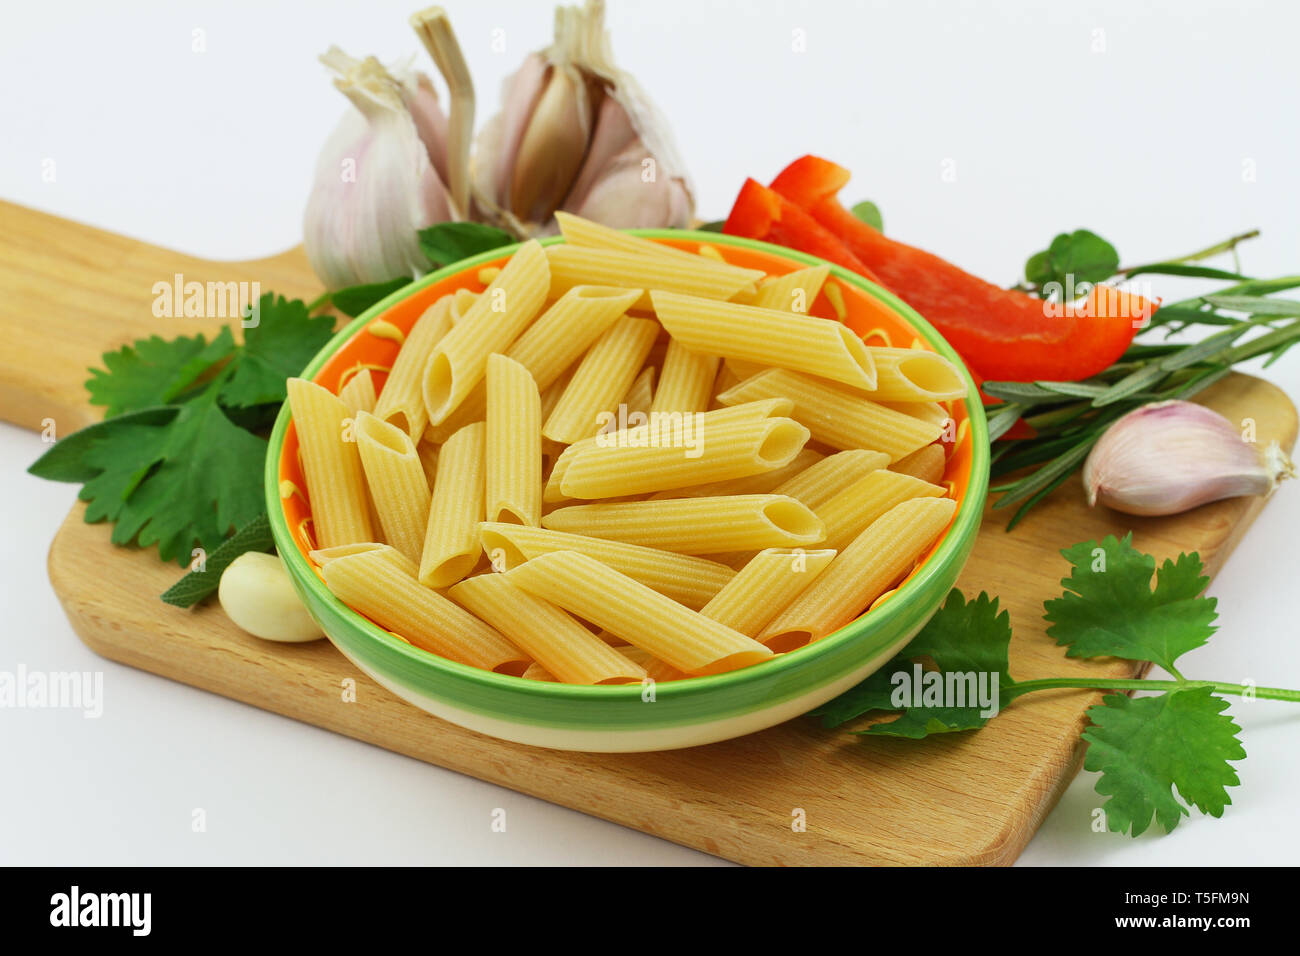 Cooking ingredients: raw pasta, garlic, red pepper and fresh herbs Stock Photo